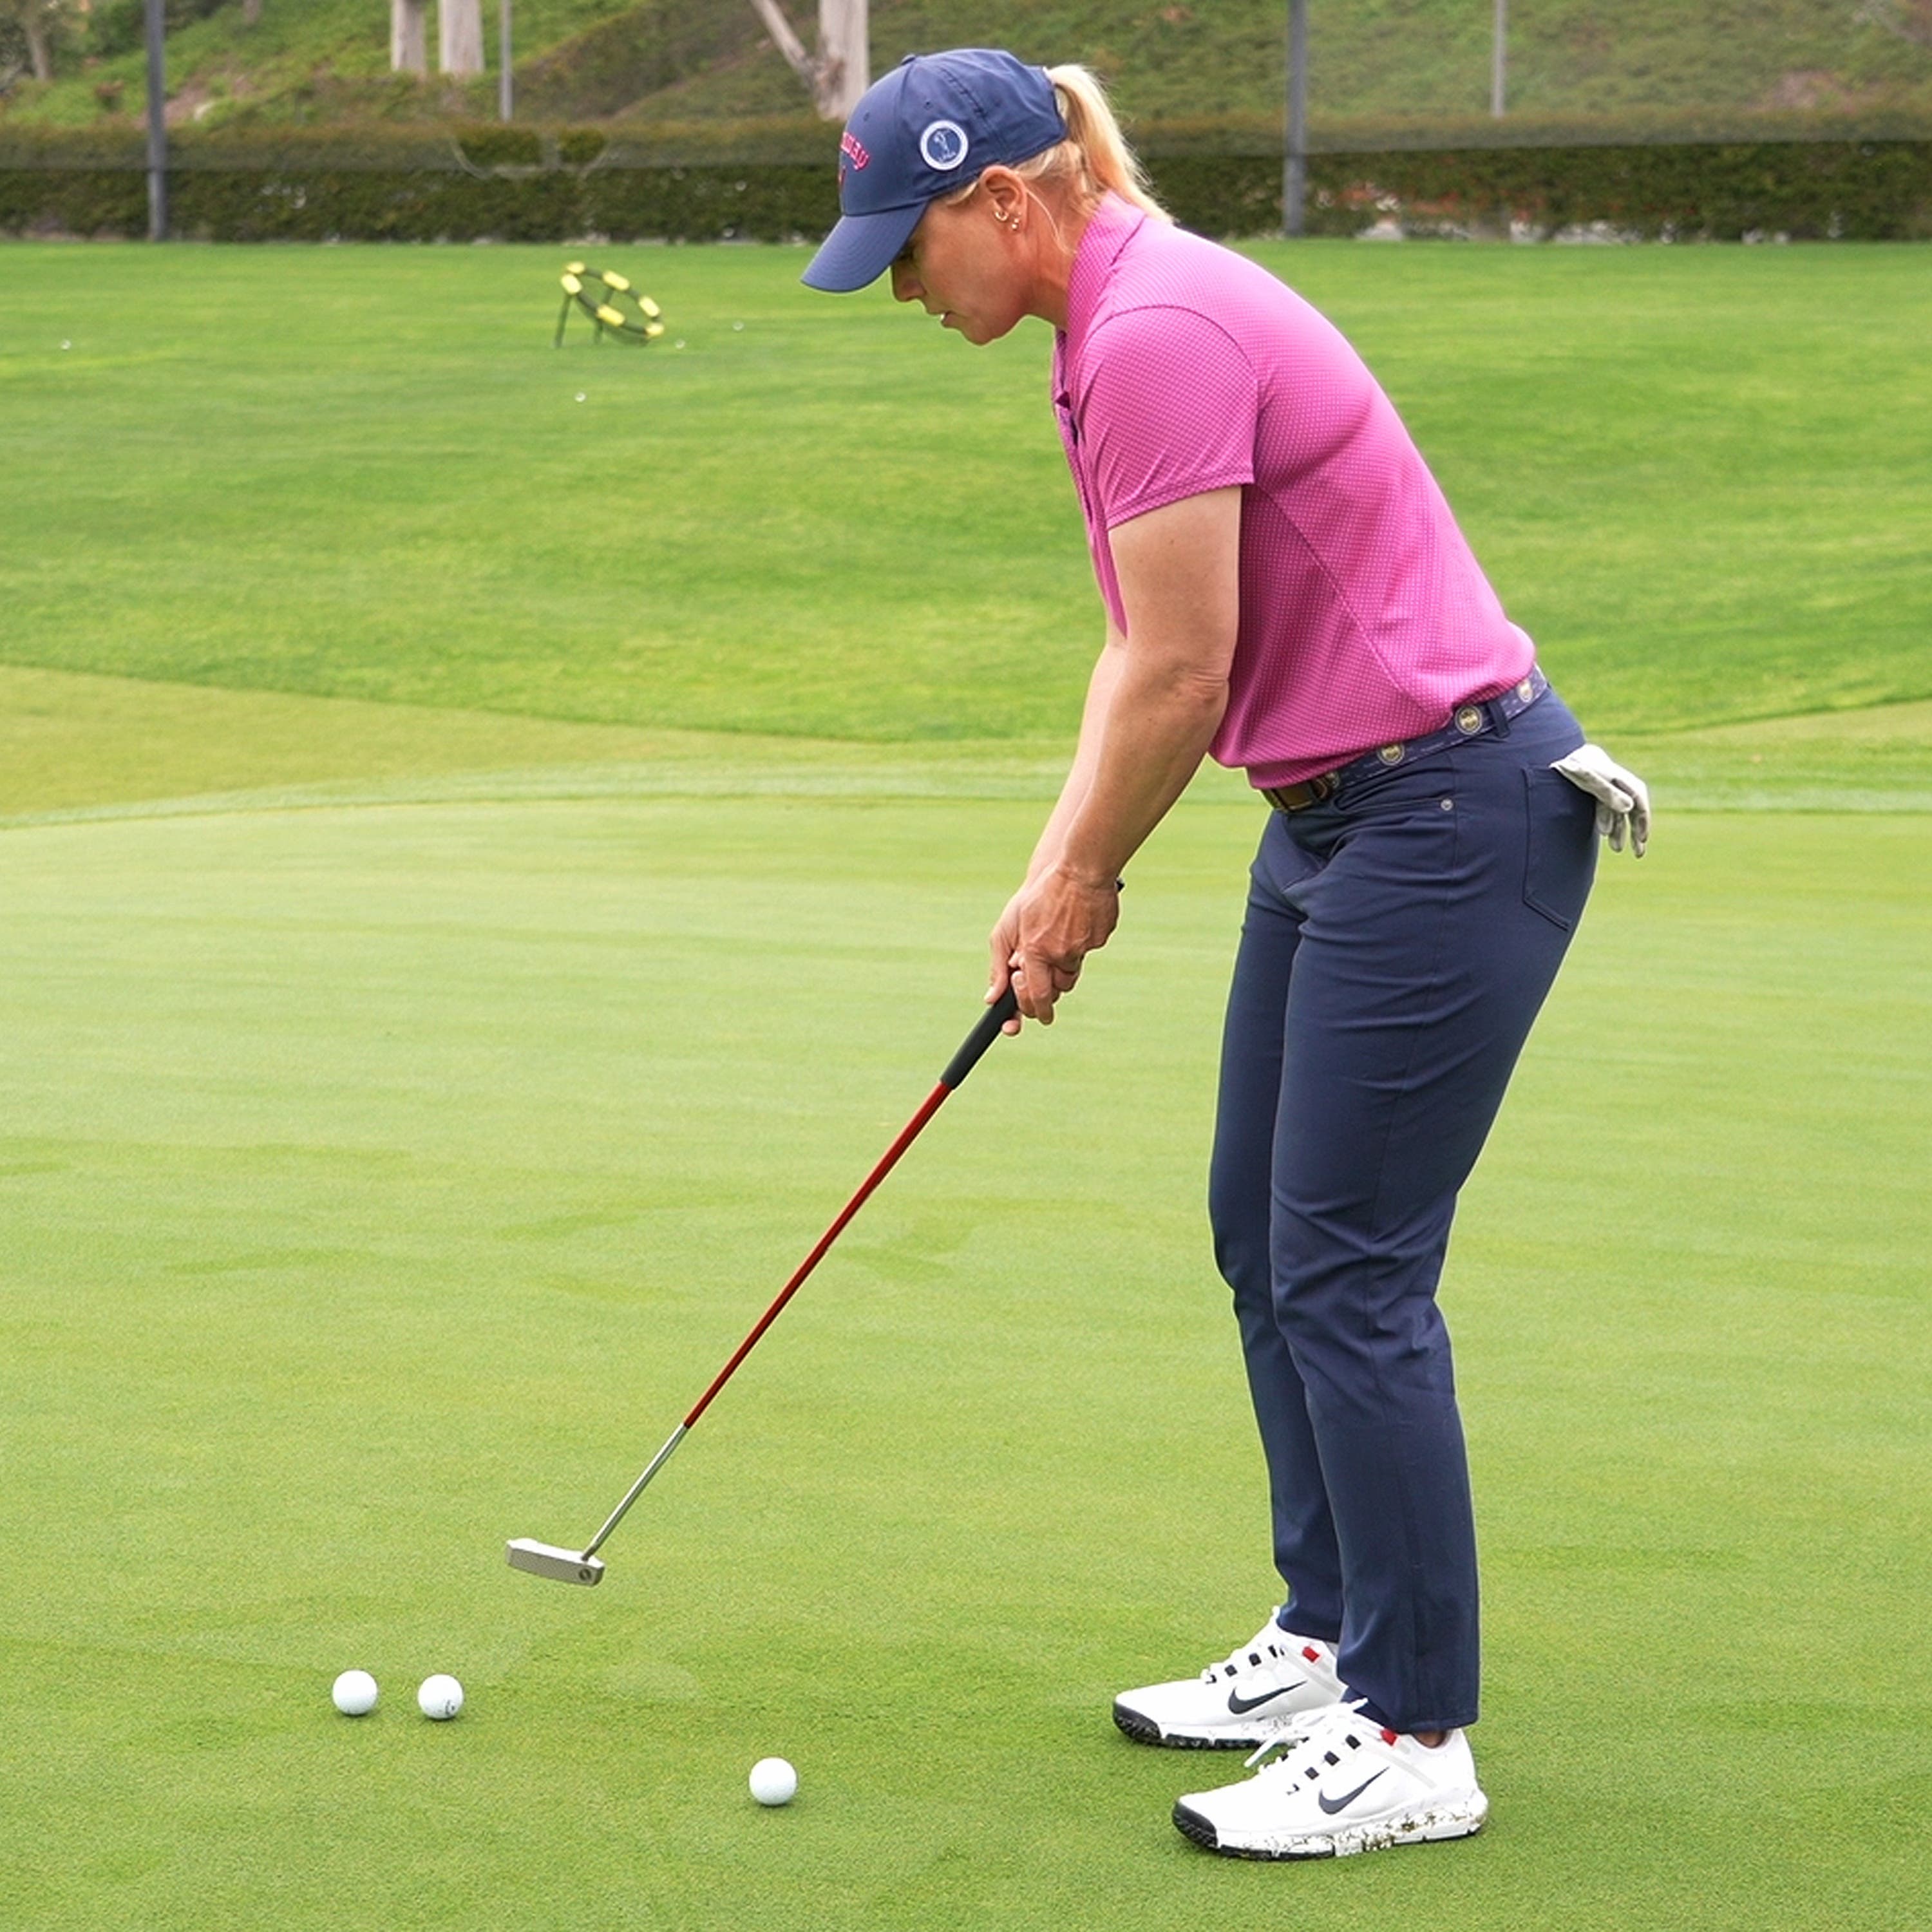 Instructor Series | How To Make More Short Putts With Dr. Alison Curdt